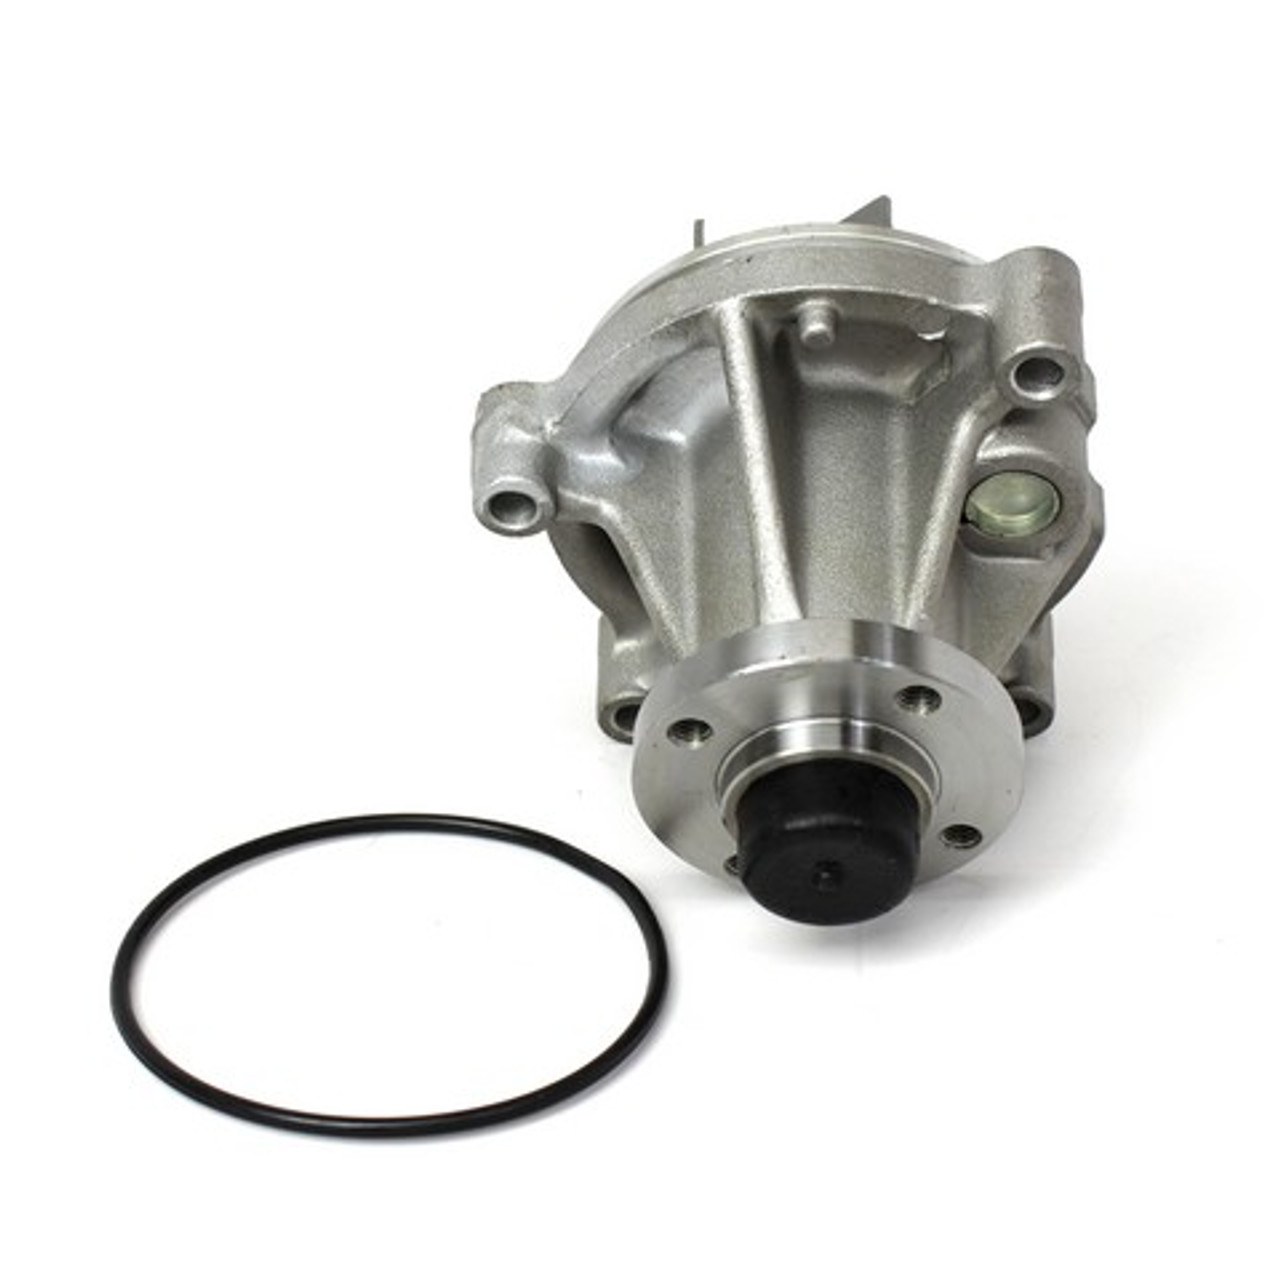 Water Pump 5.4L 2012 Ford E-250 - WP4170.50